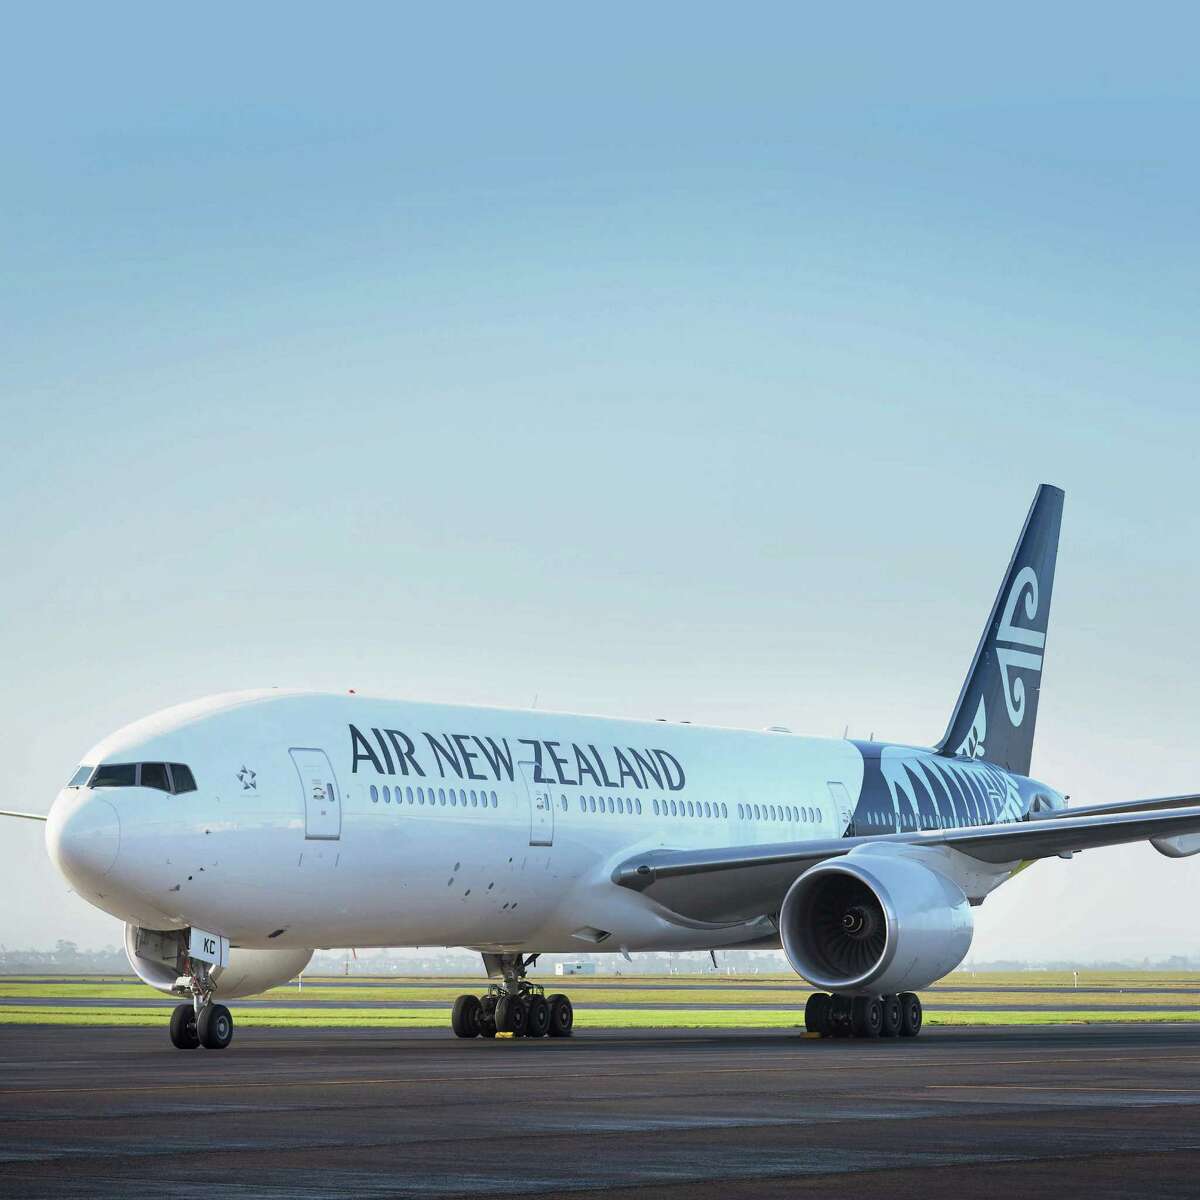 Air New Zealand Boeing 777-200. The airline will fly a nonstop flight between Houston and Auckland beginning in December 2015.